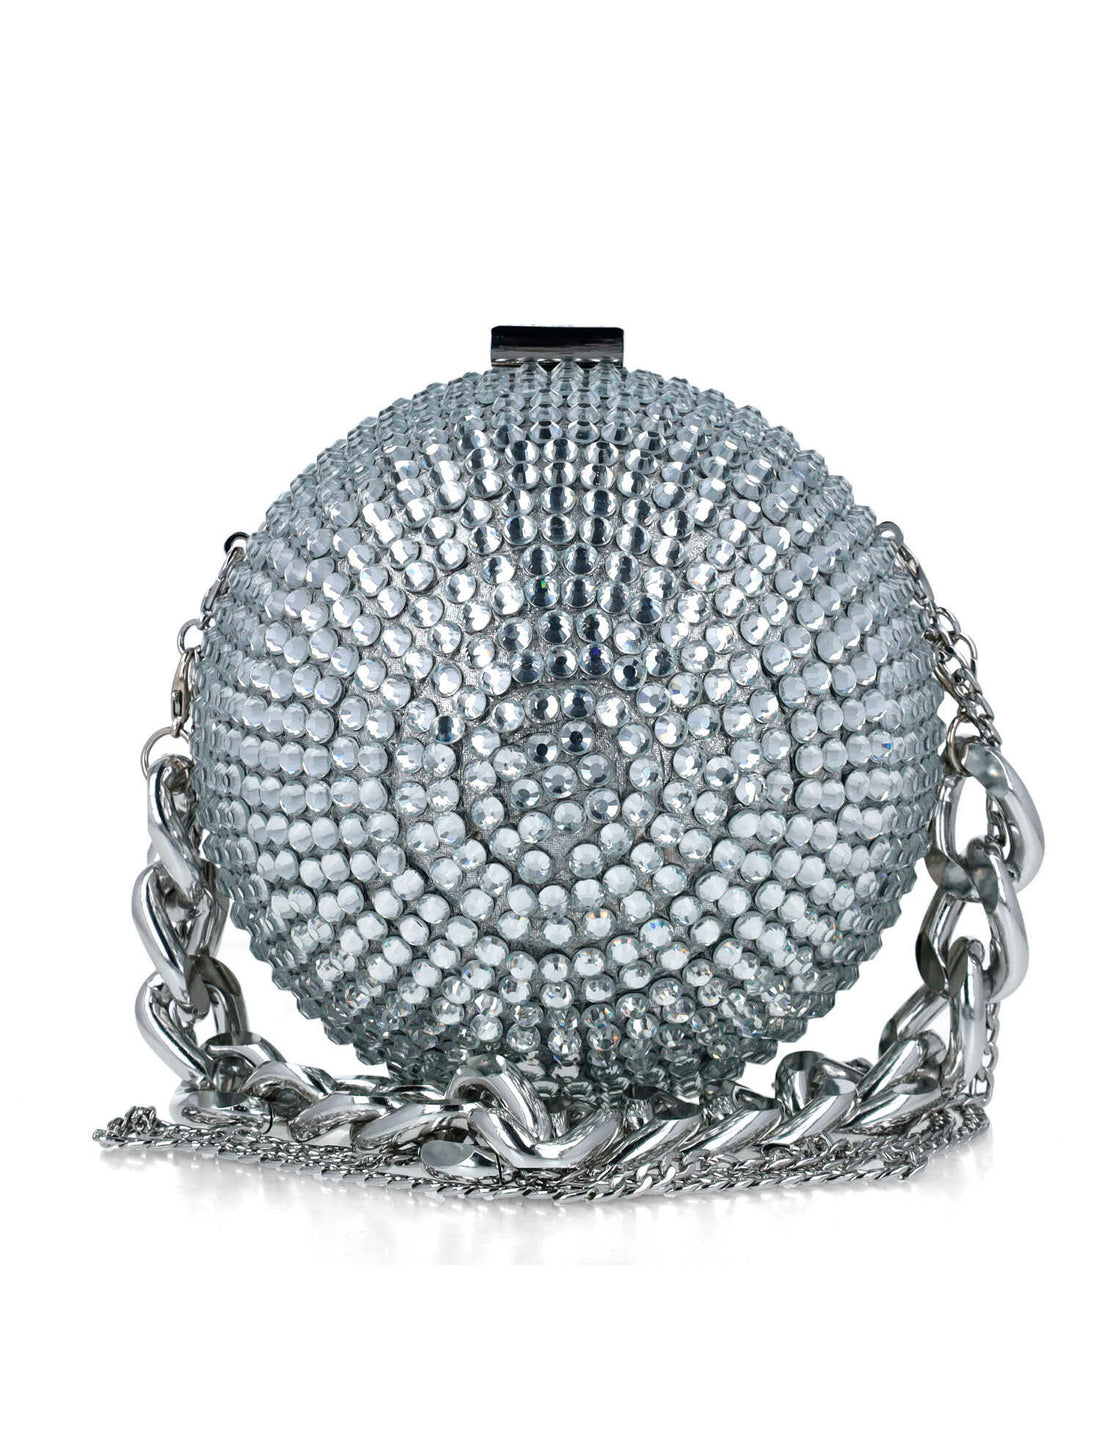 Round Clutch With Over Embellishment And Chain Strap_85670_09_01